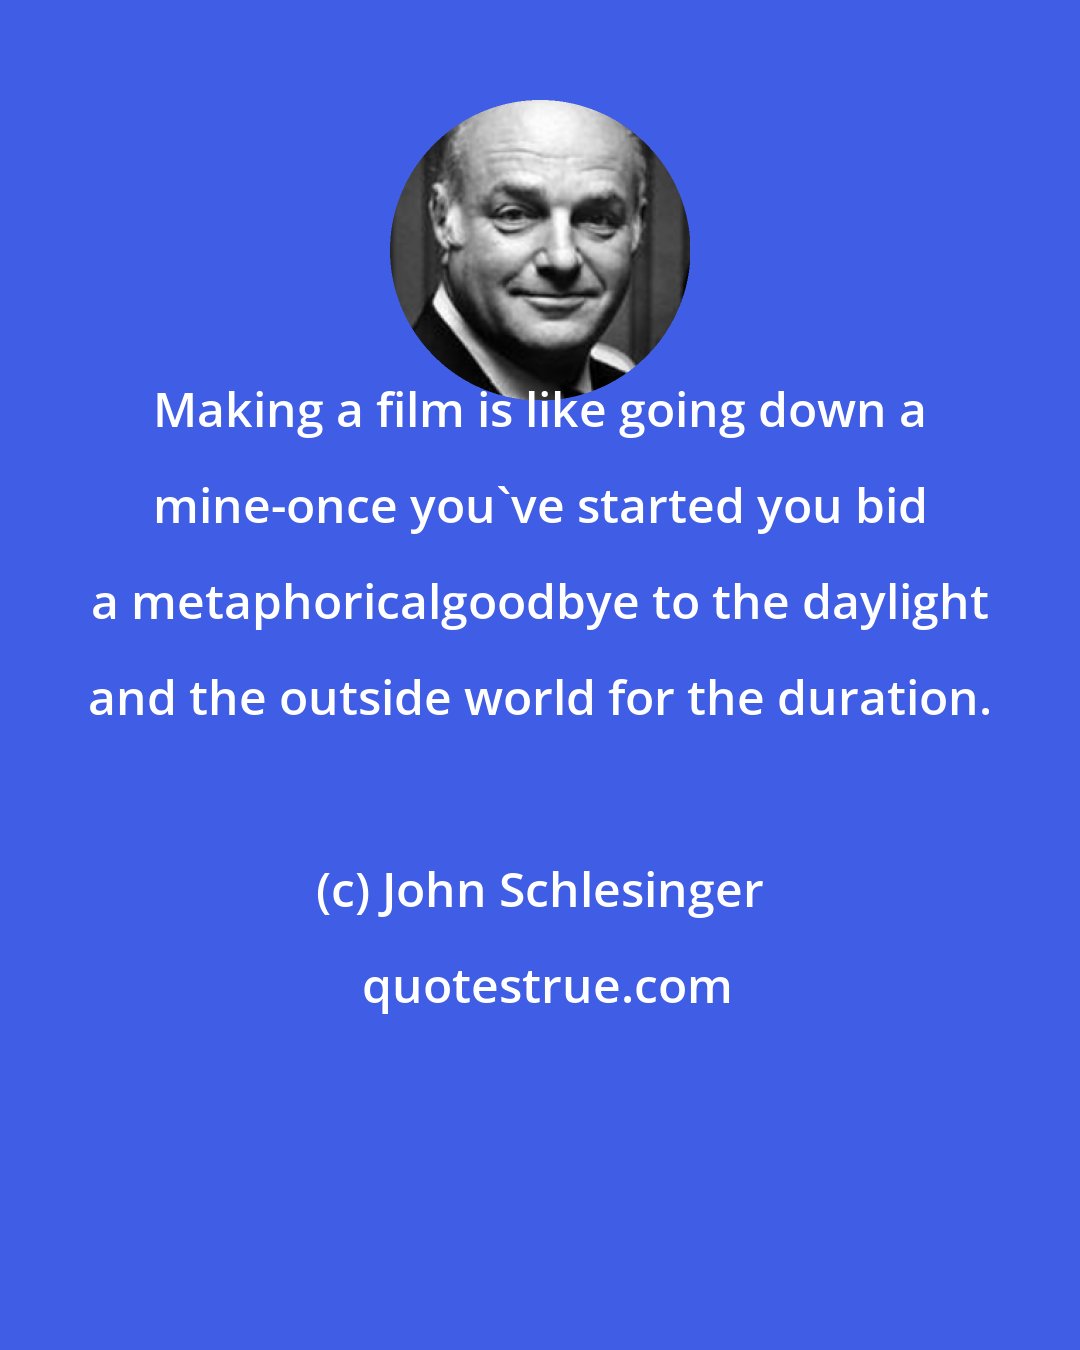 John Schlesinger: Making a film is like going down a mine-once you've started you bid a metaphoricalgoodbye to the daylight and the outside world for the duration.